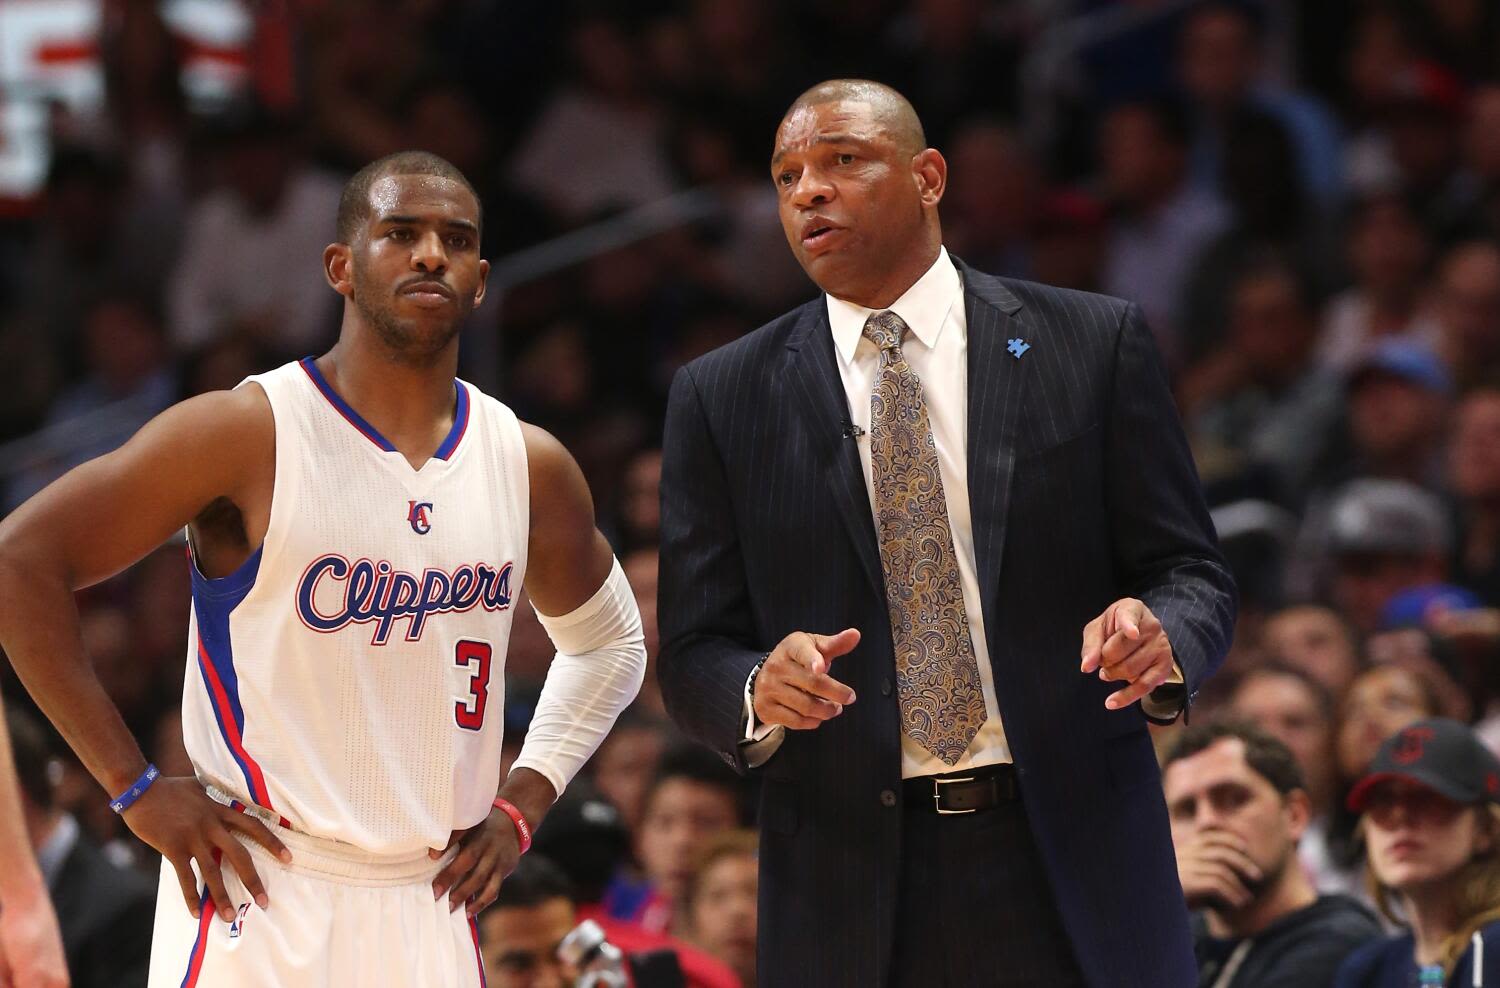 Fact-checking 'Clipped,' a series about the Clippers' Donald Sterling scandal